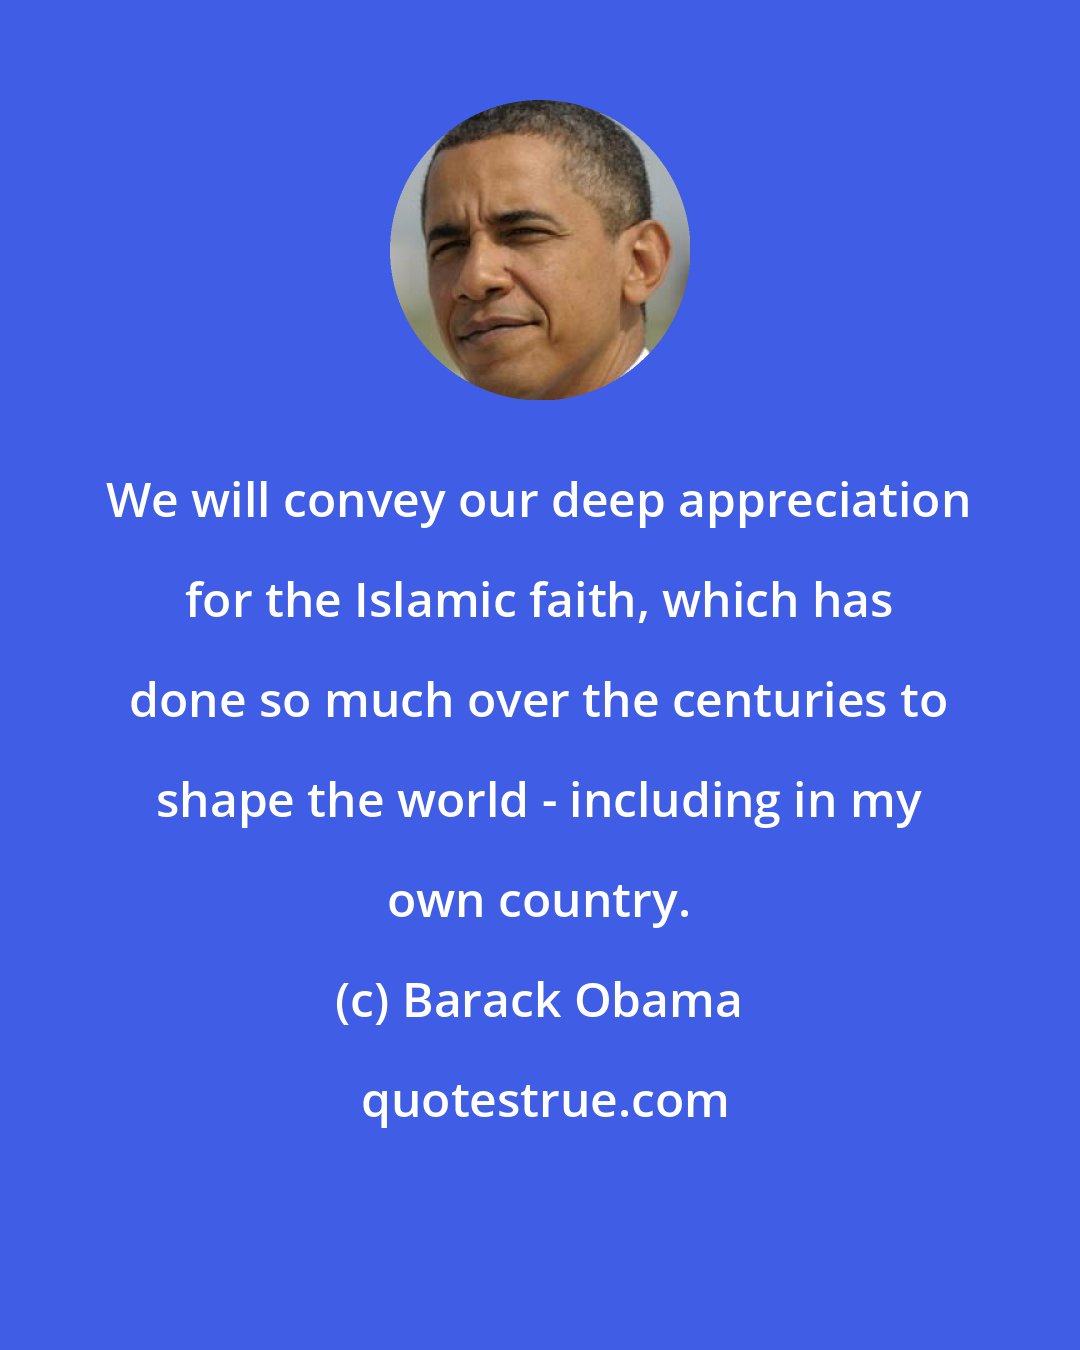 Barack Obama: We will convey our deep appreciation for the Islamic faith, which has done so much over the centuries to shape the world - including in my own country.